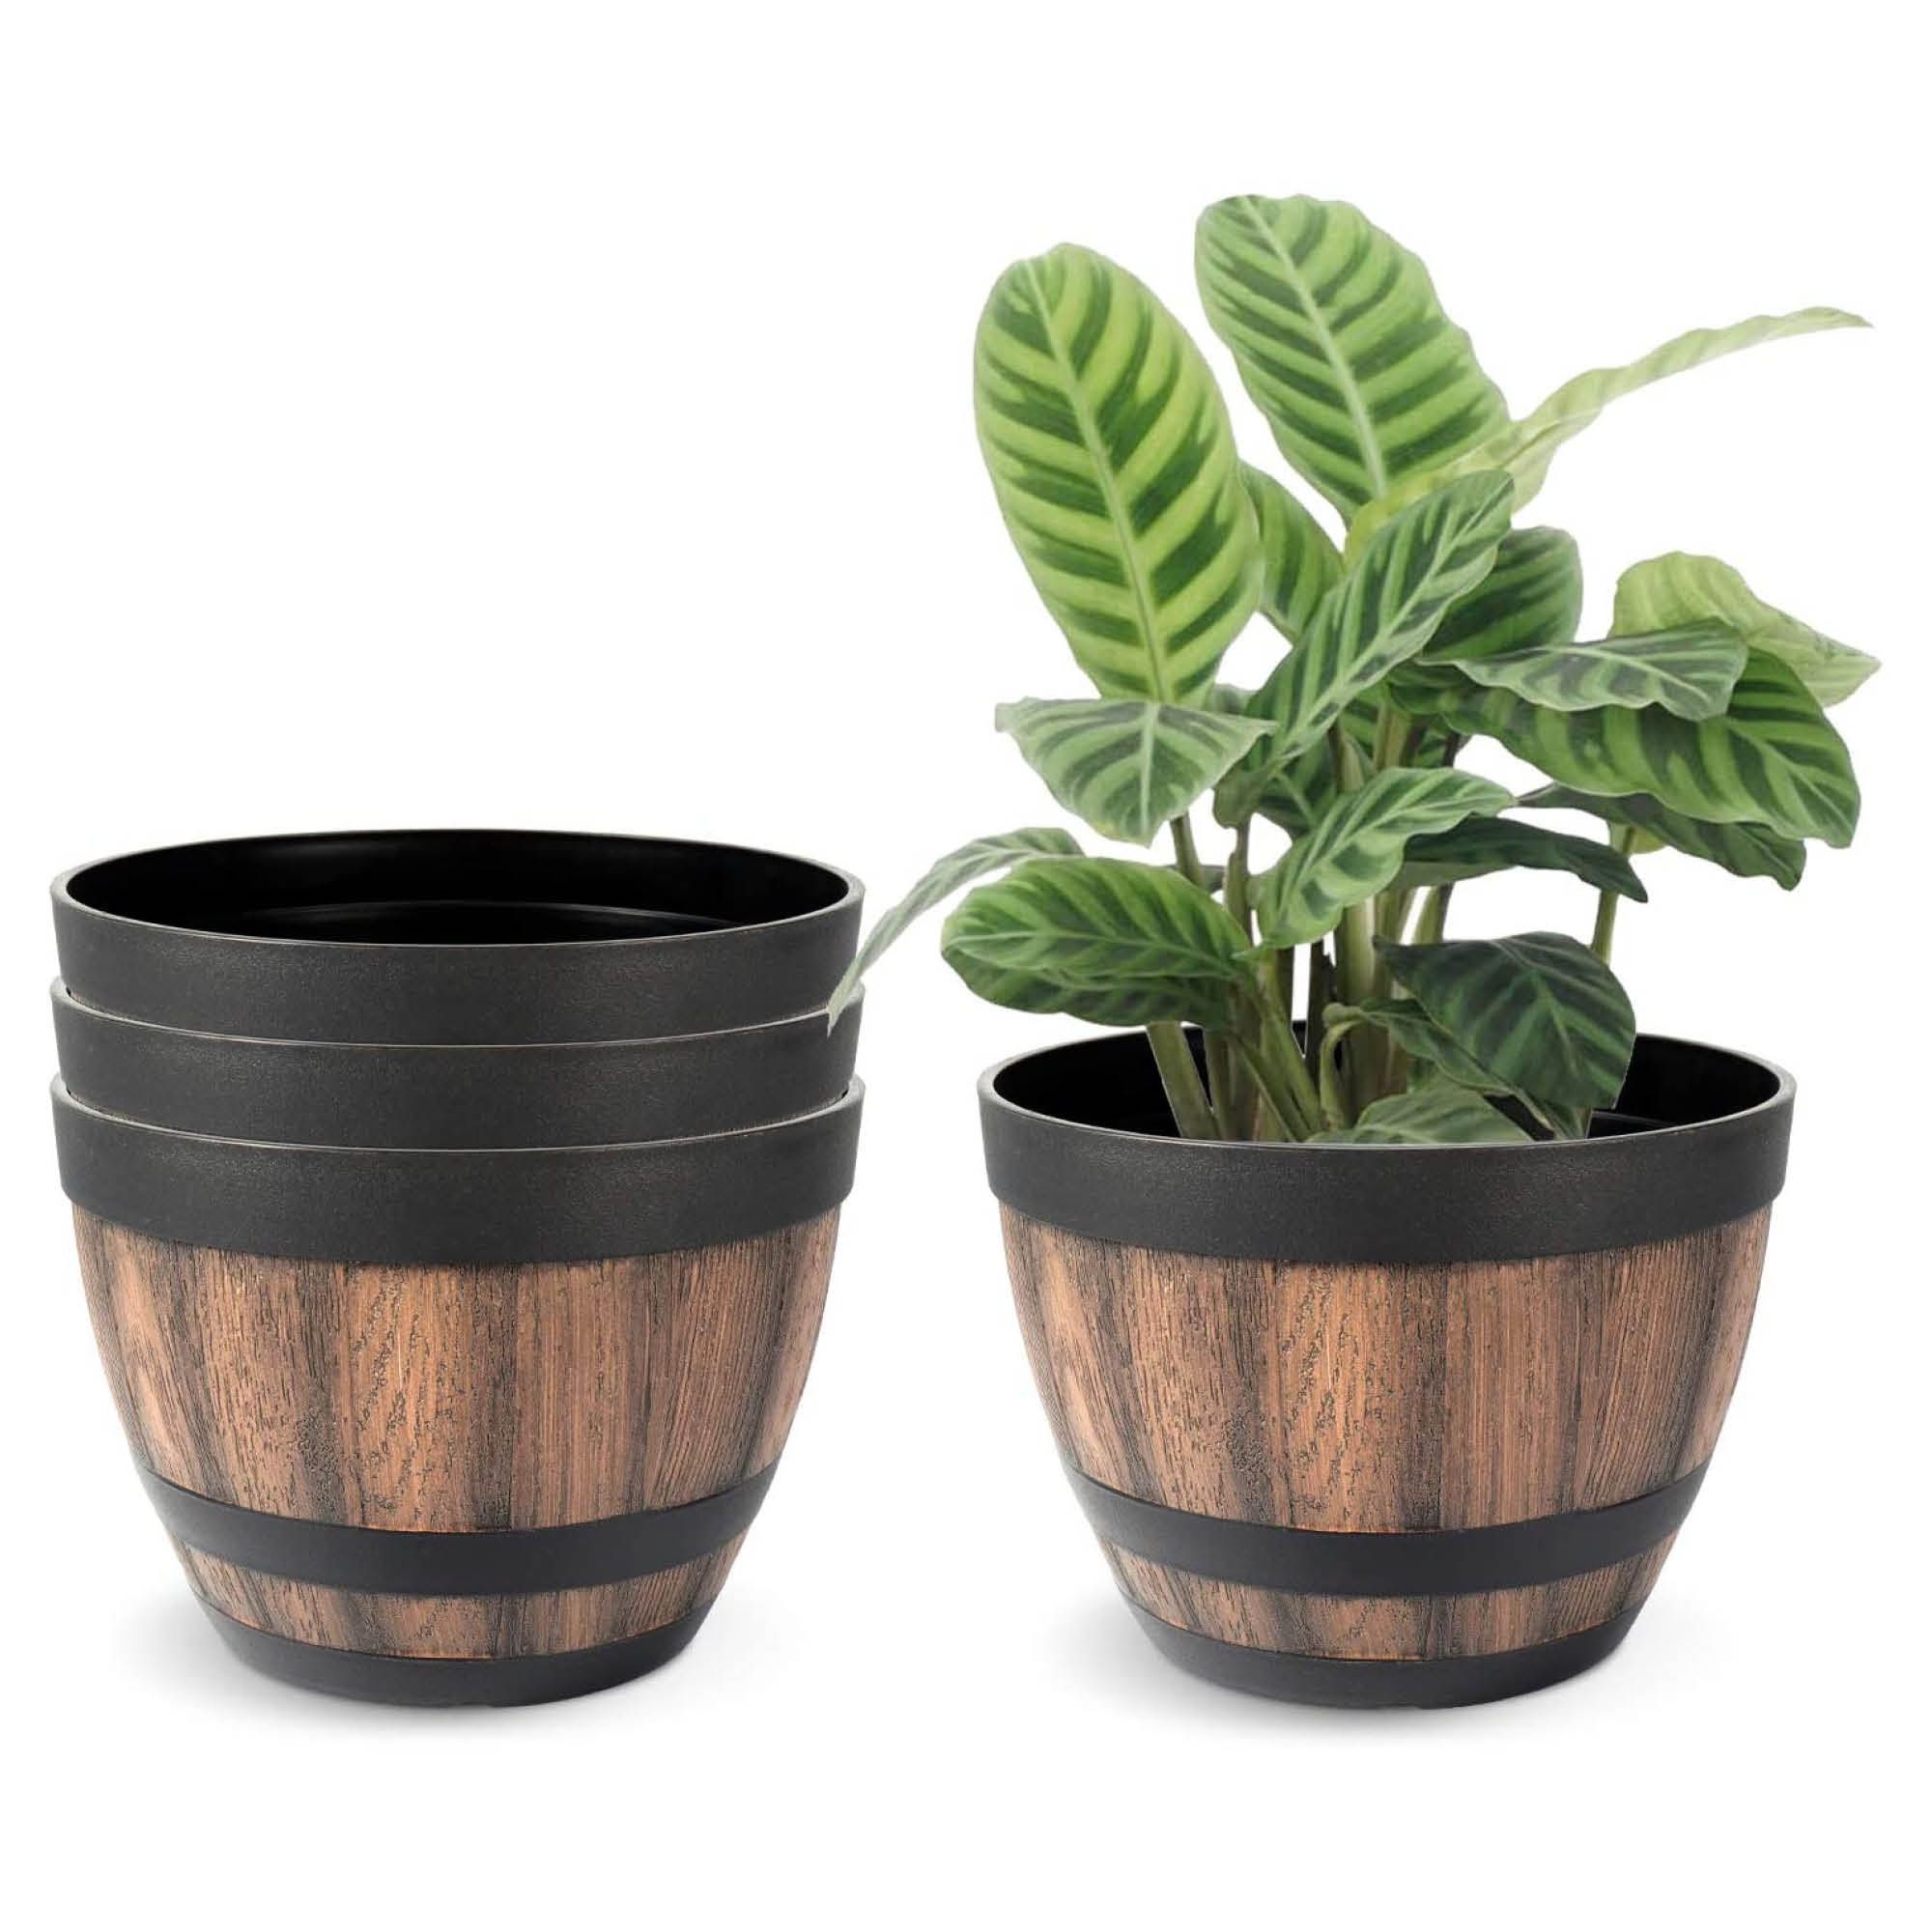 Plant Barrel Planter Containers 